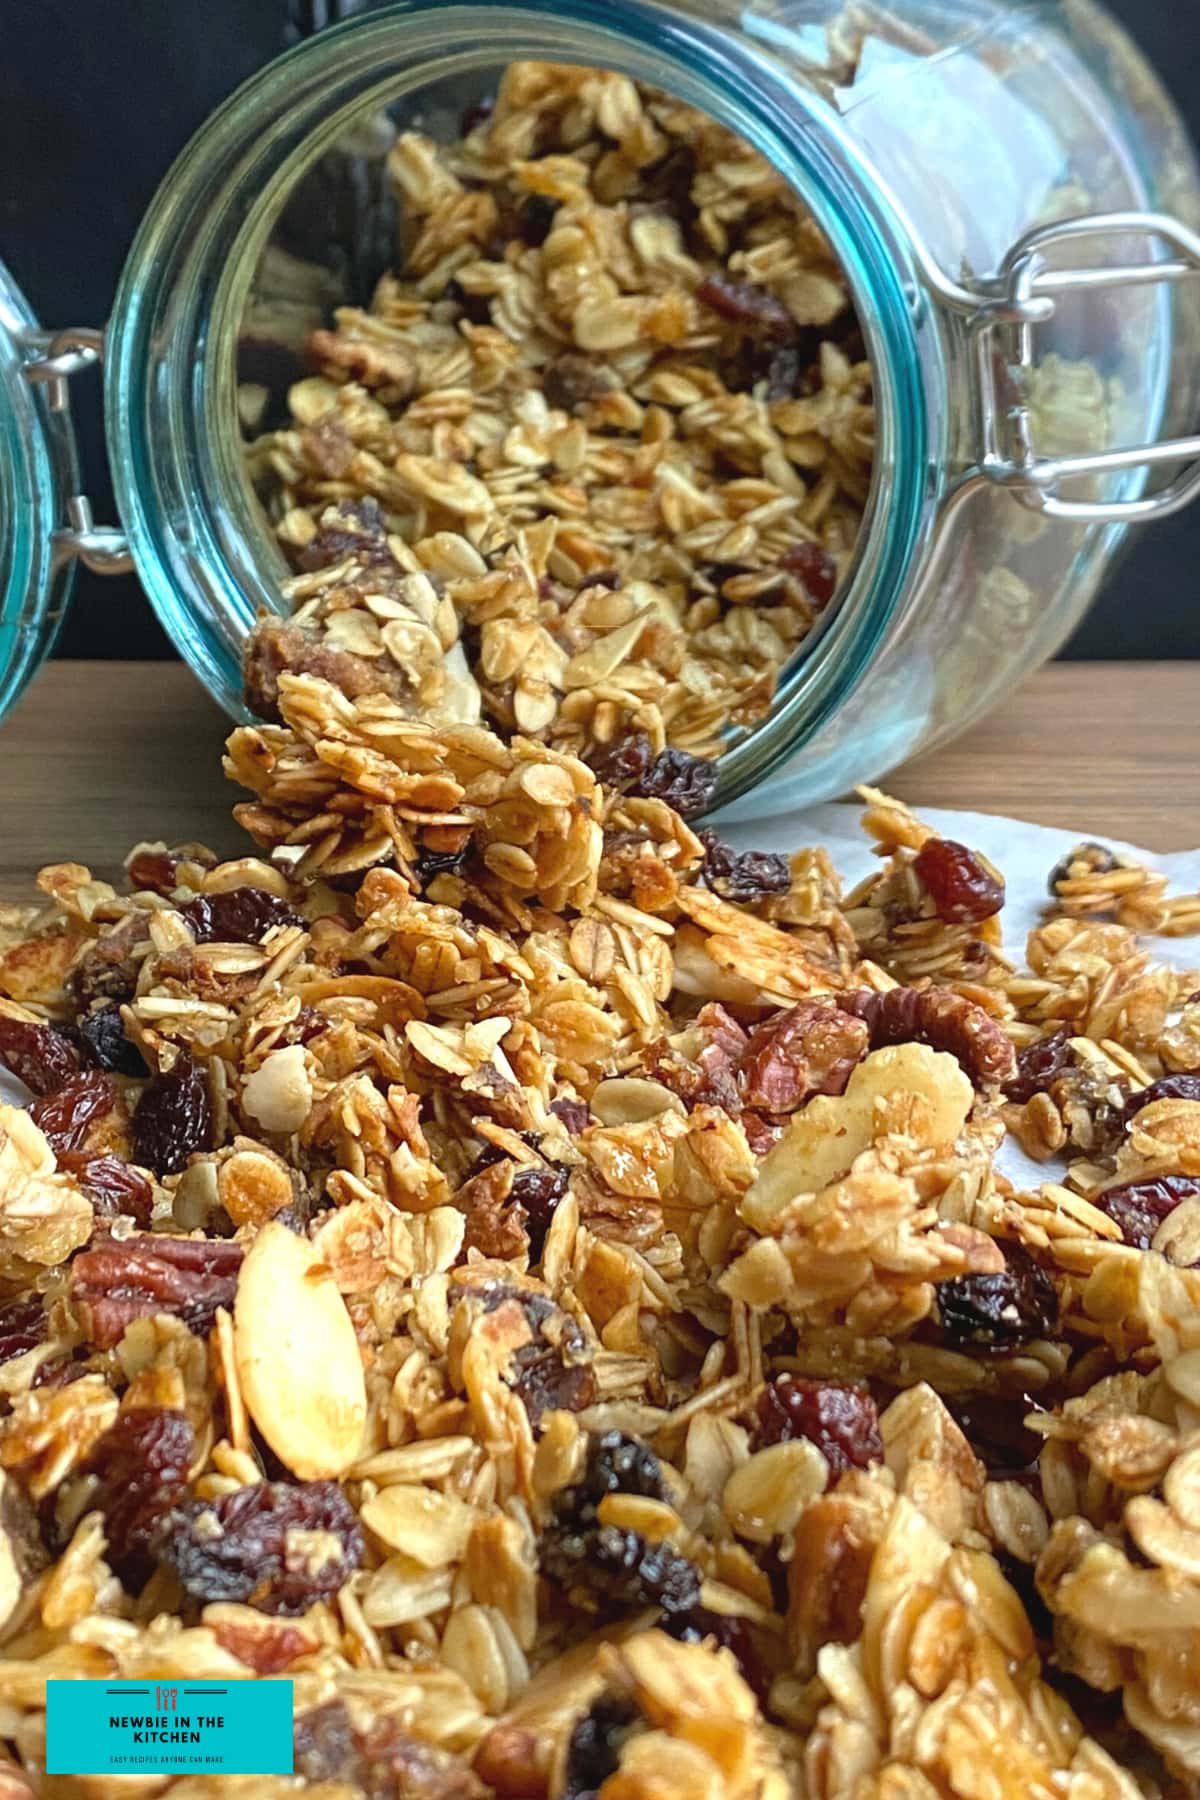 Easy Homemade Pecan Honey Granola. An easy recipe for how to make your own homemade granola. A mix of honey, nuts, and fruit make this a great start to your day. Delicious served for breakfast with yogurt and fresh fruit